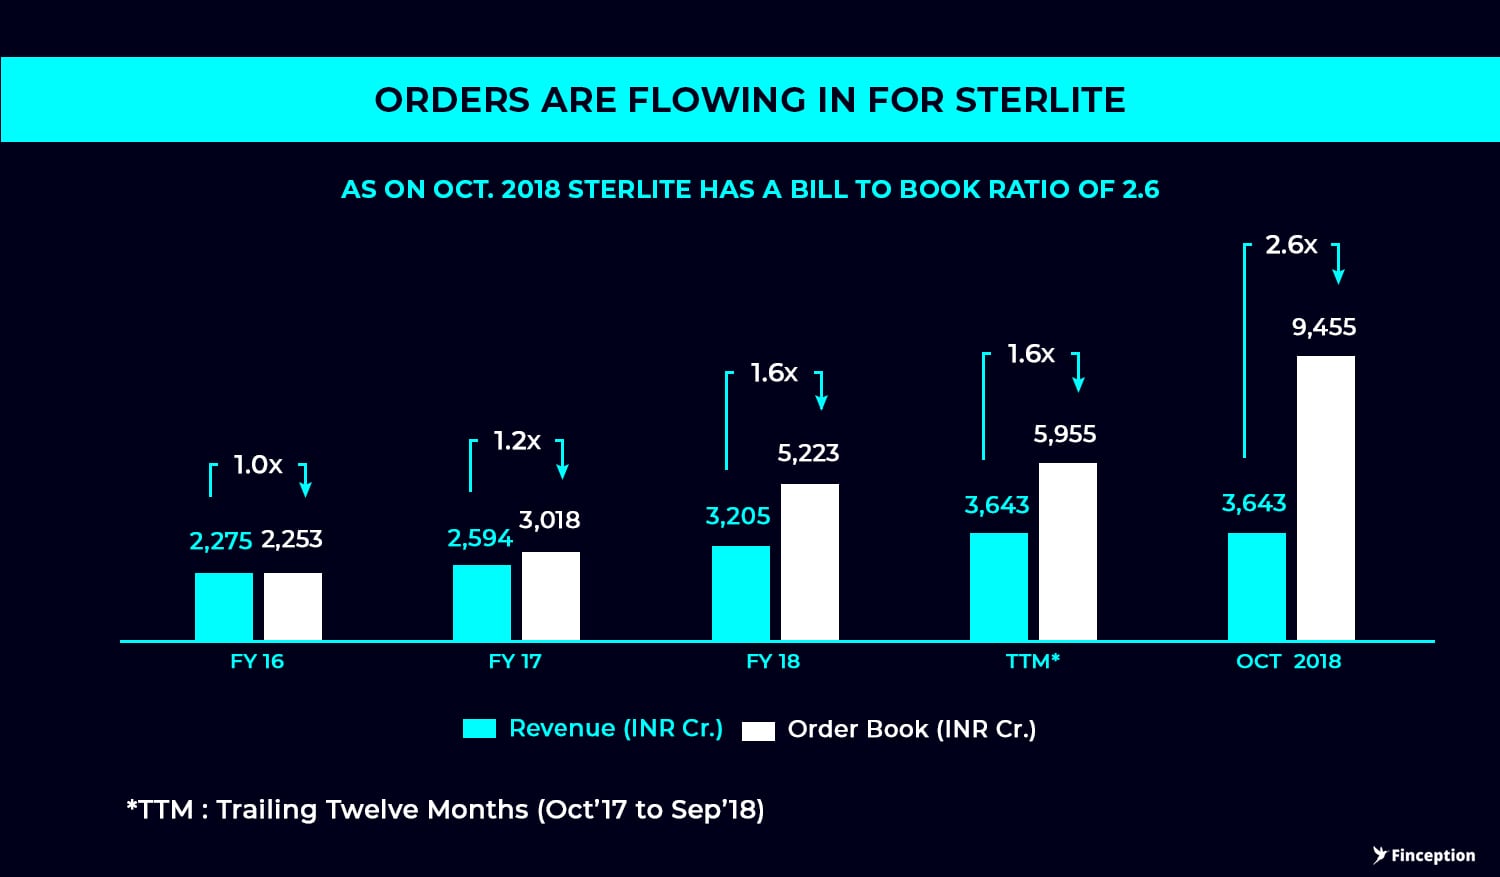 Sterlite Technologies current order book is 2.6 times it's revenue. The company has fully booked it's capacity till 2020